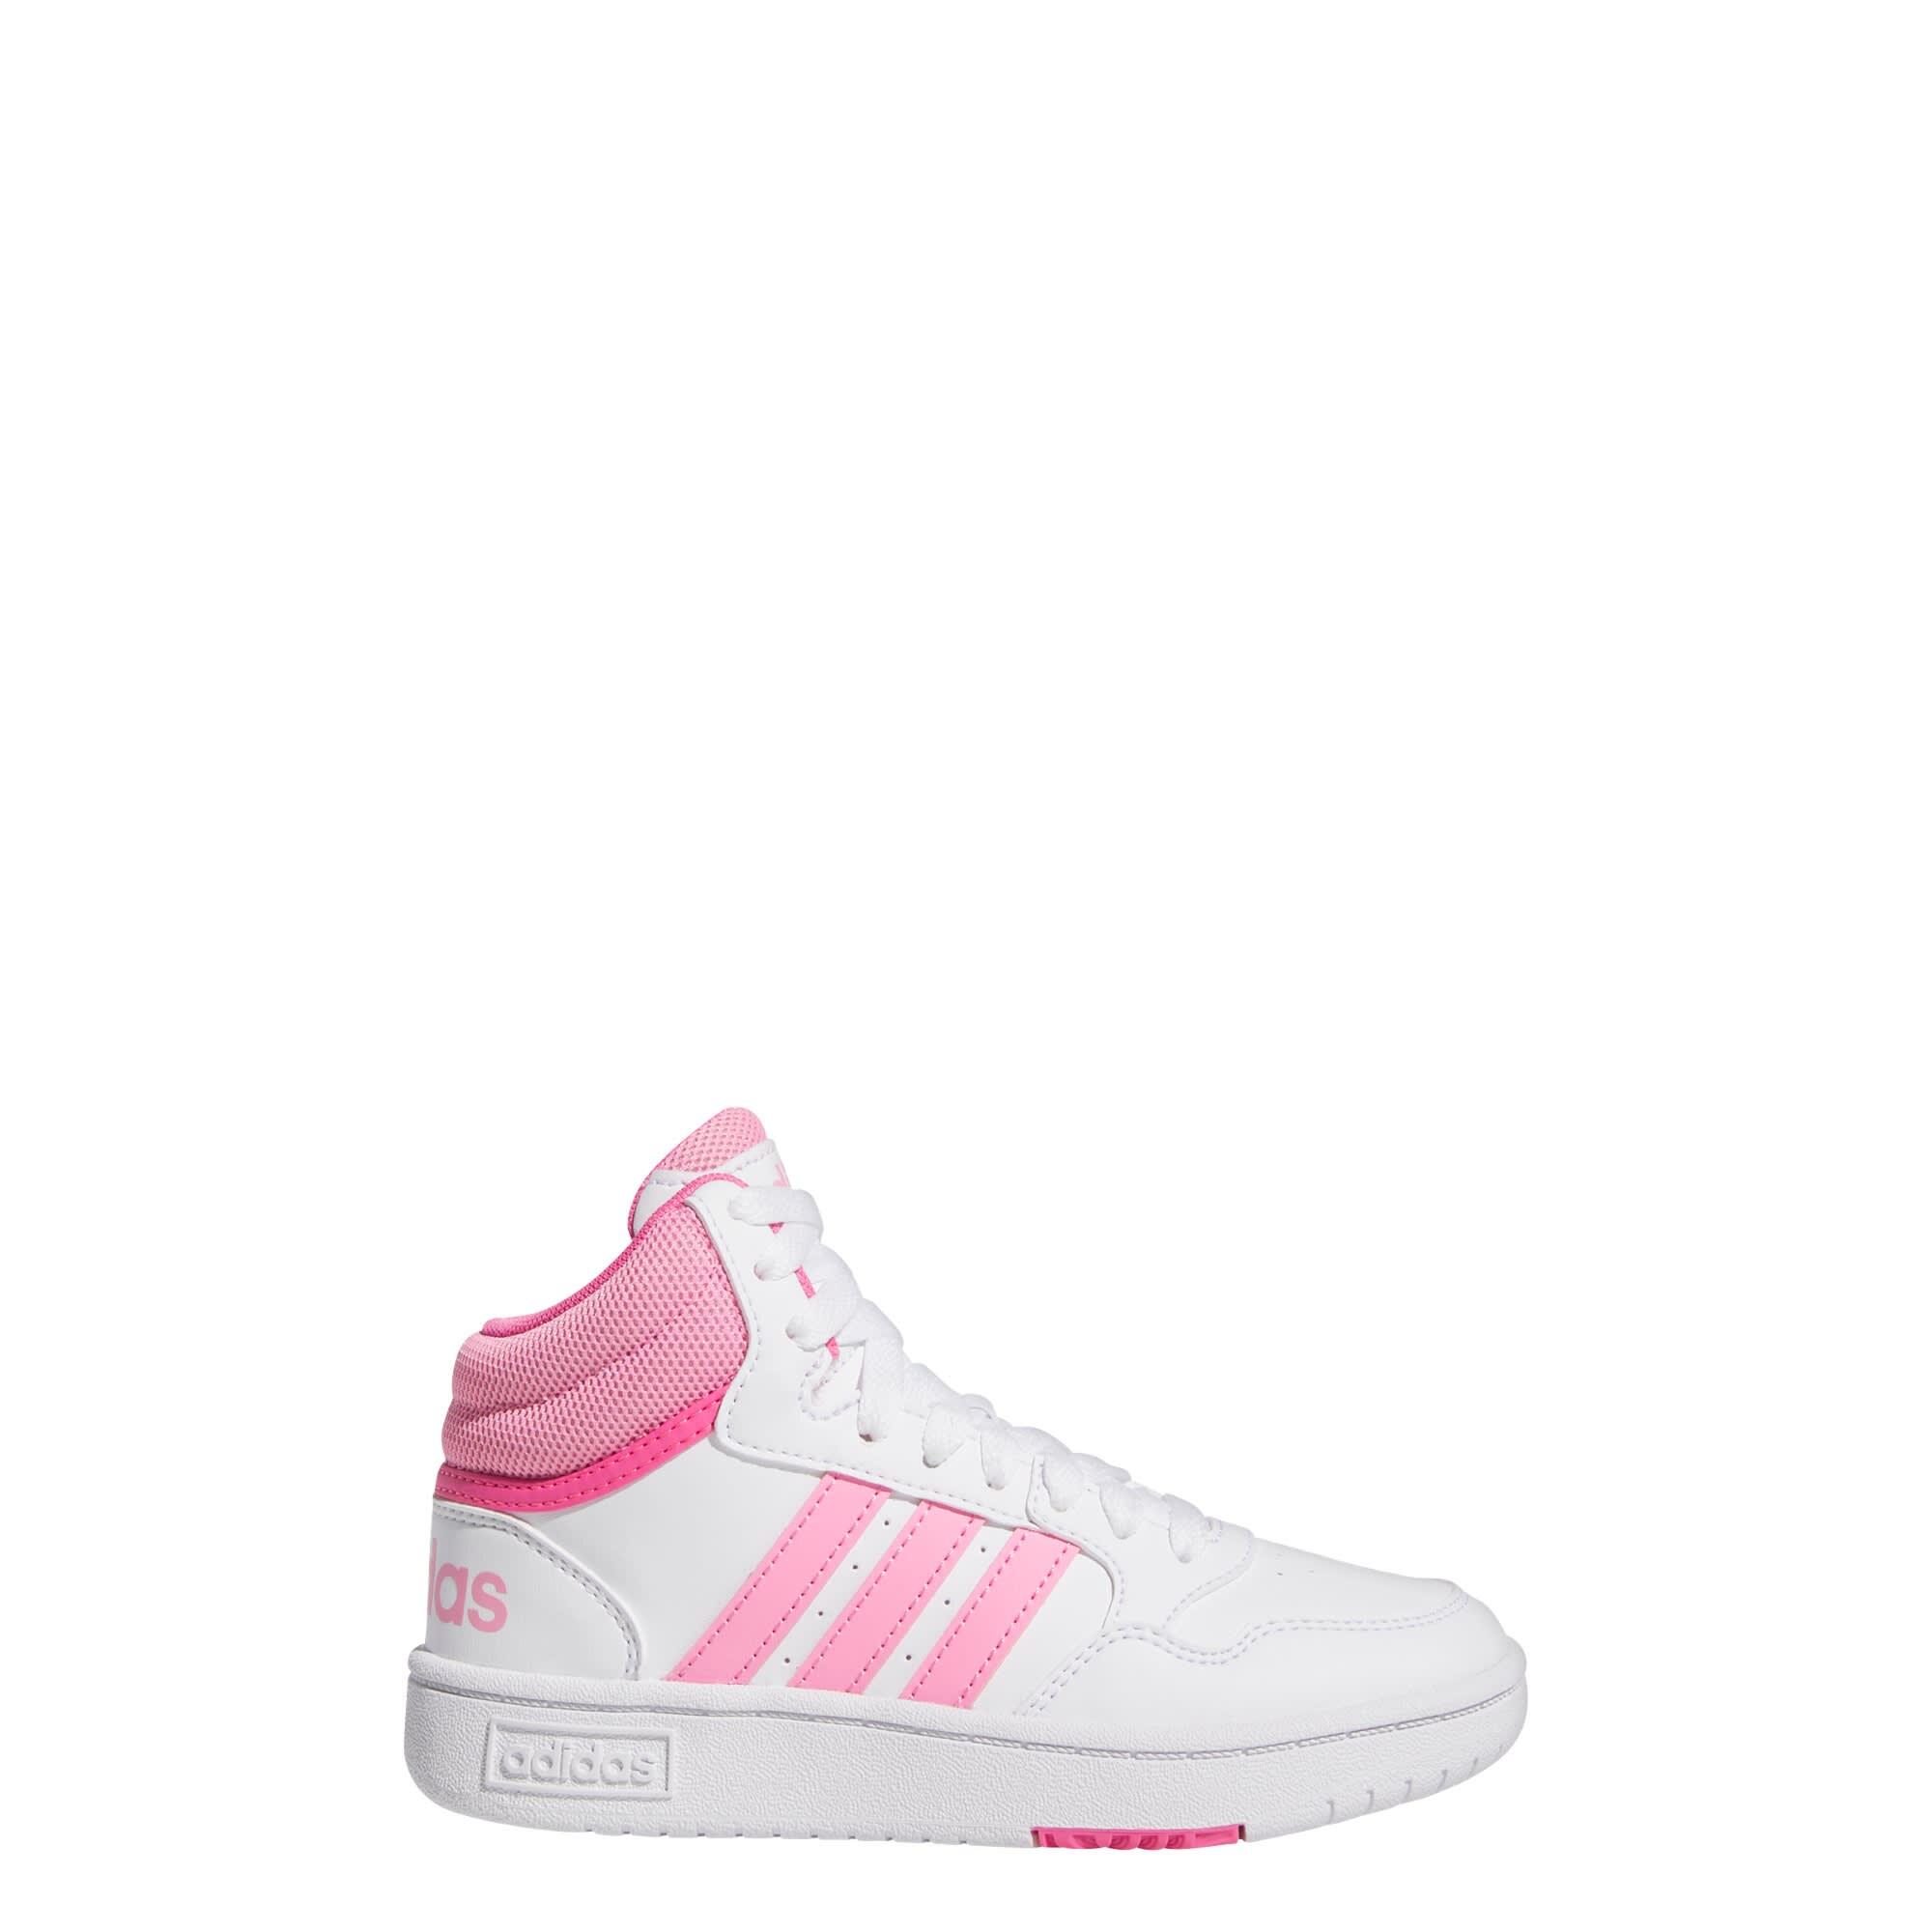 ADIDAS Hoops Mid Shoes